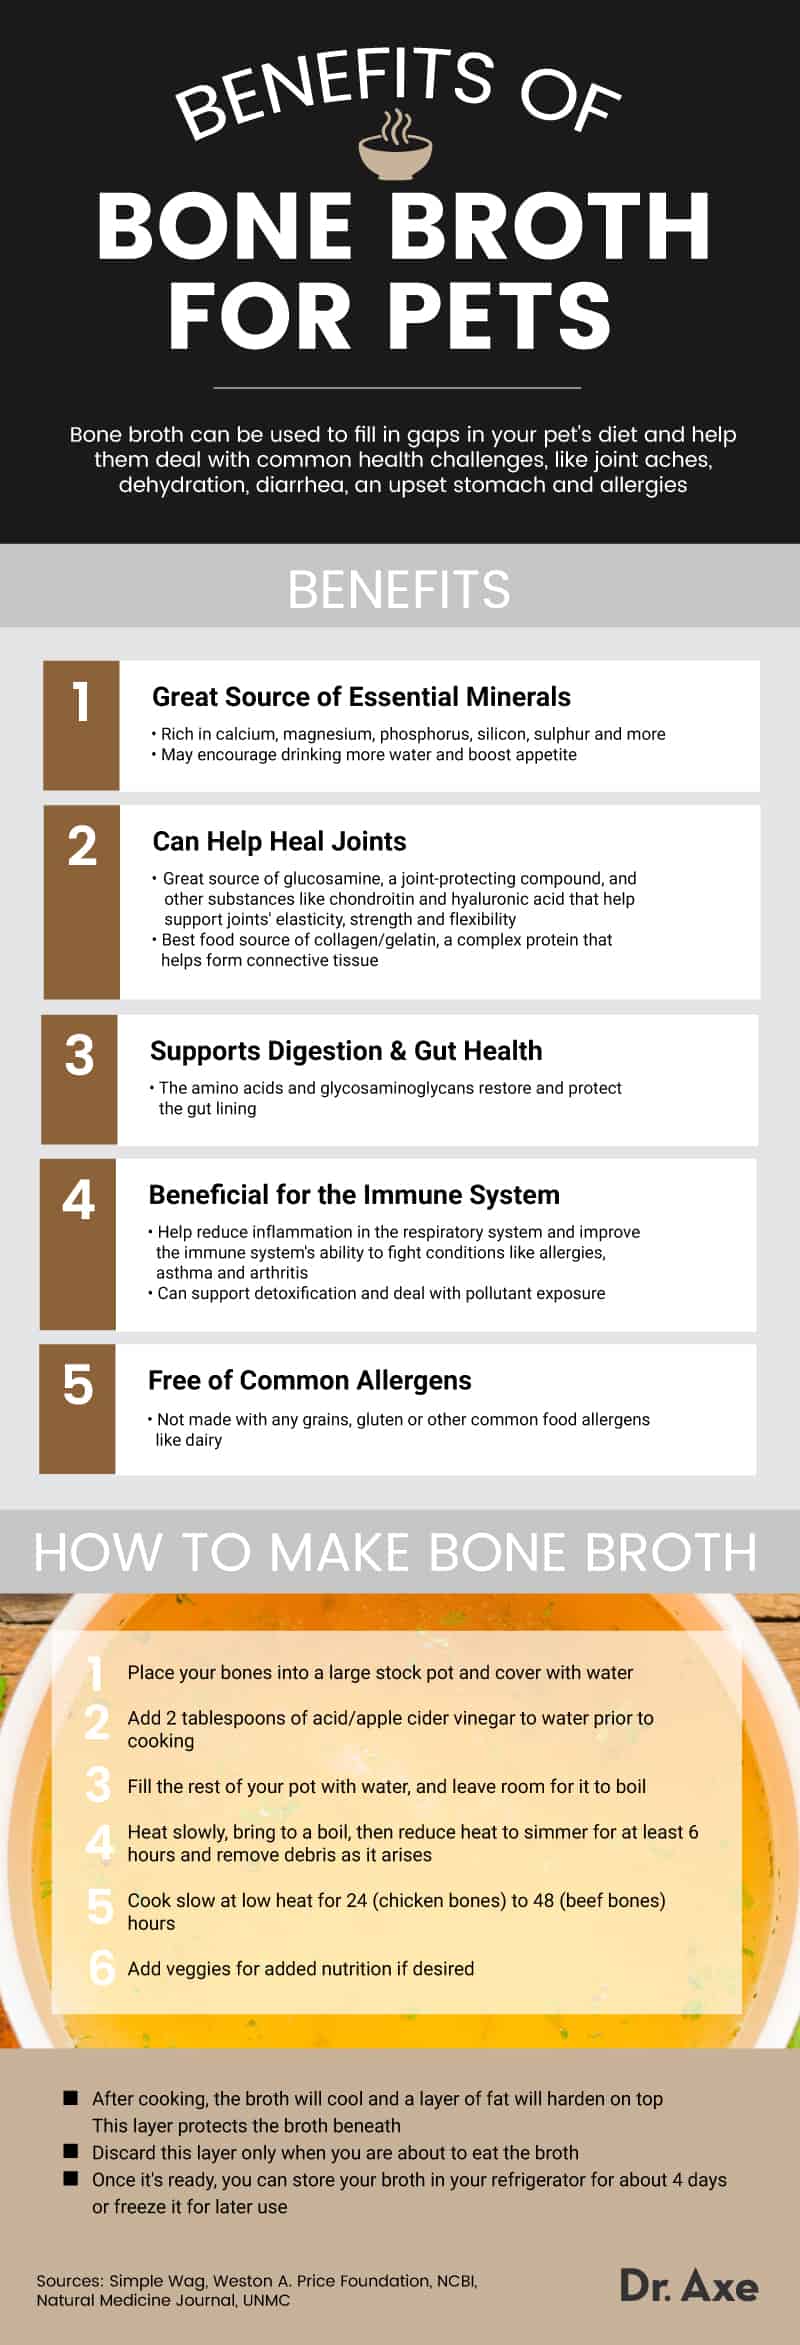 Bone broth for dogs and other pets - Dr. Axe